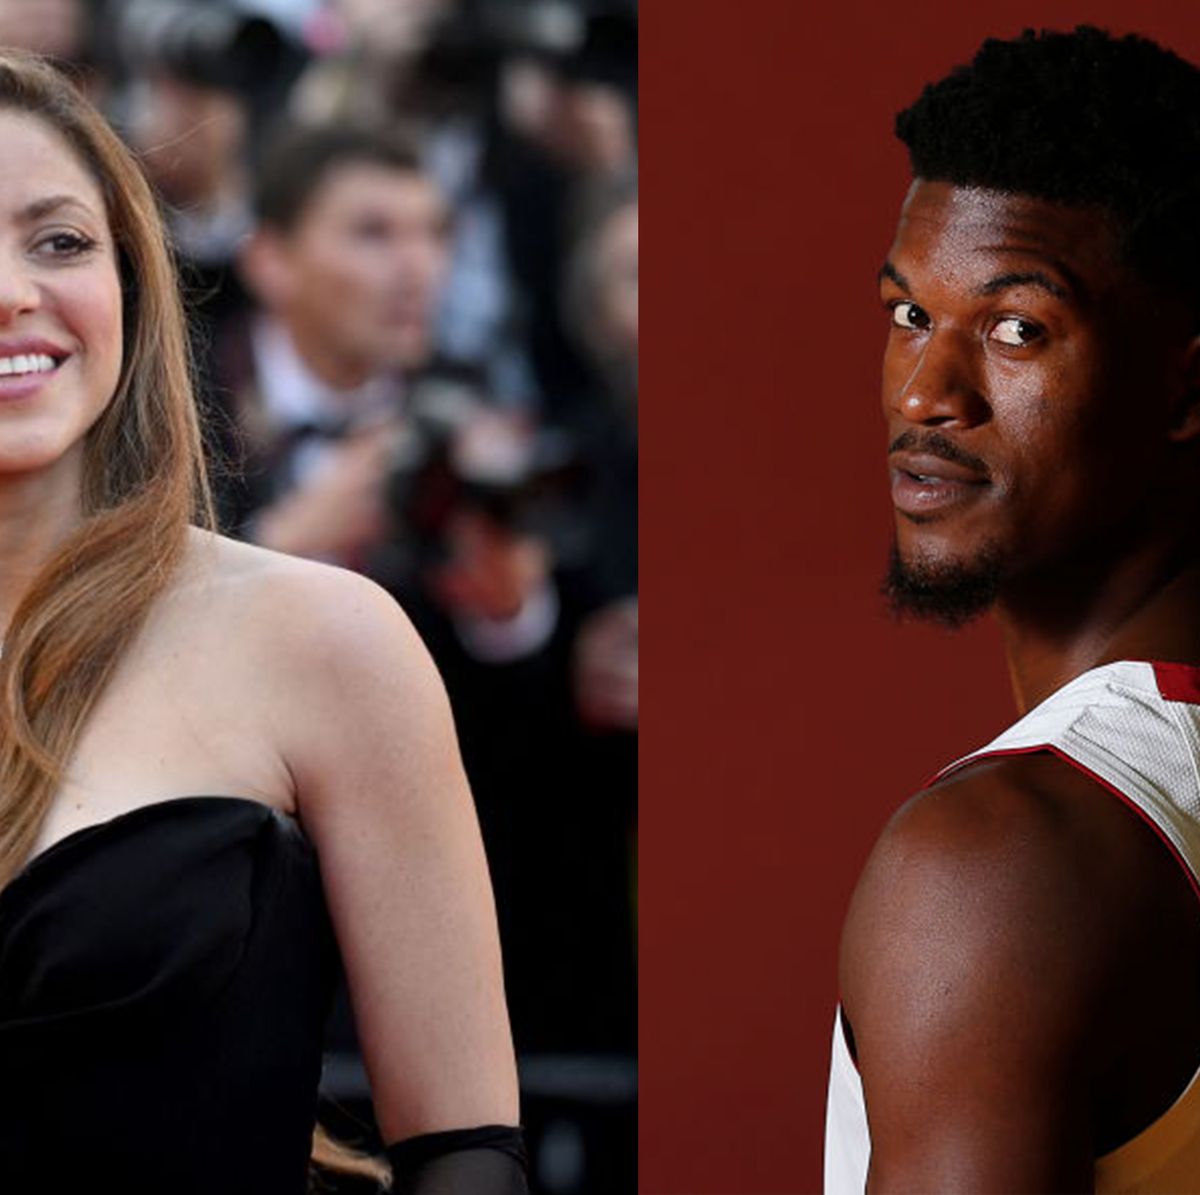 REPORT: Jimmy Butler and Shakira are currently dating. “Jimmy makes Shakira  smile, and she feels happy spending time with him.” (per…